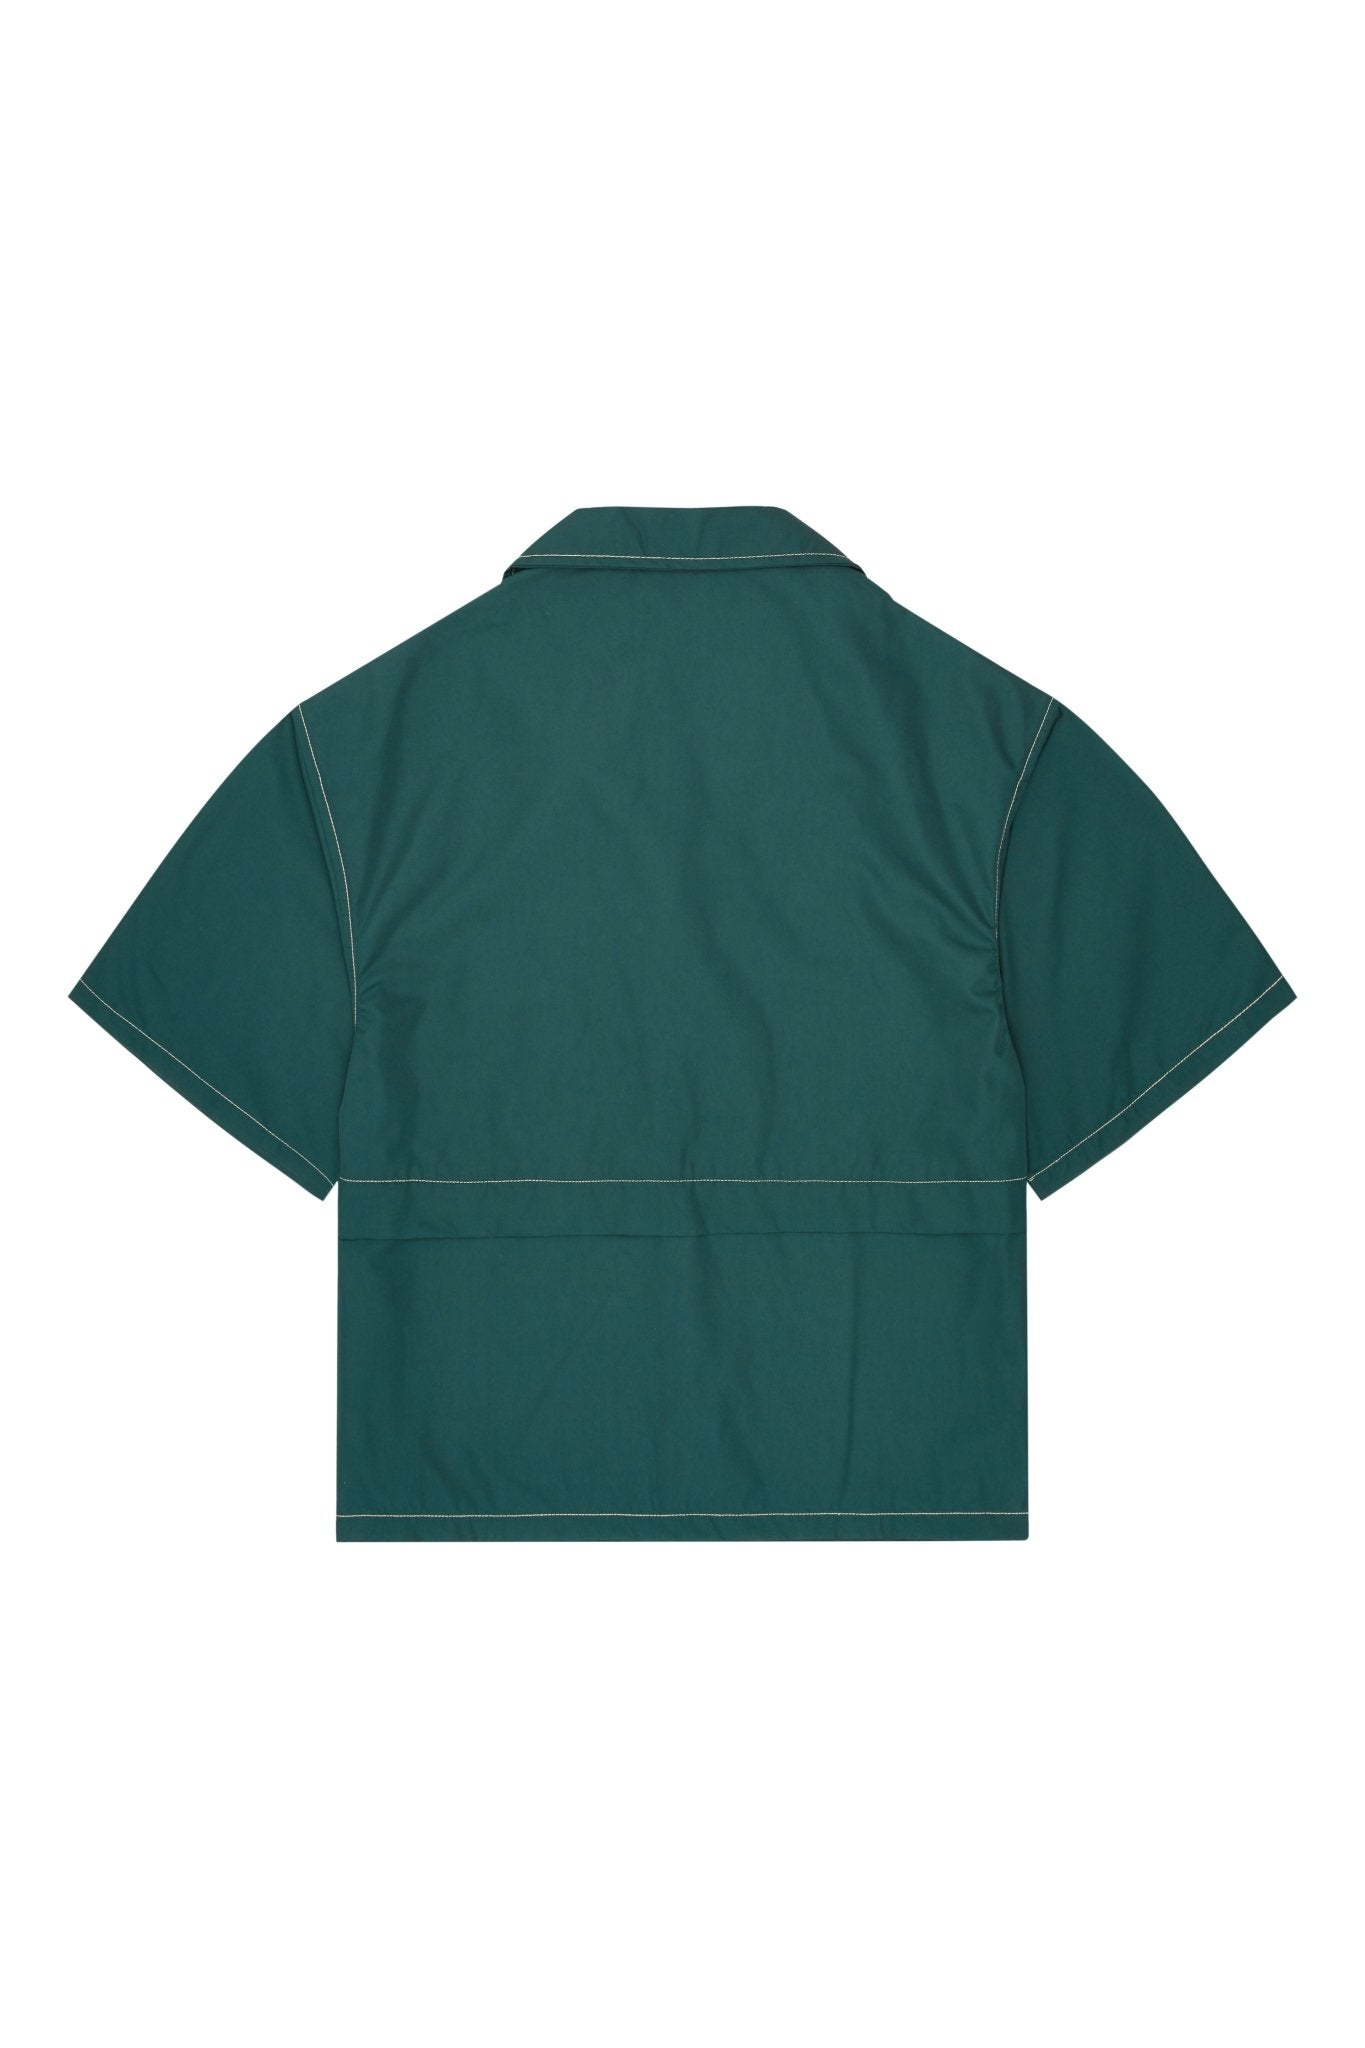 about---blank.comutility shirt epsom green V2